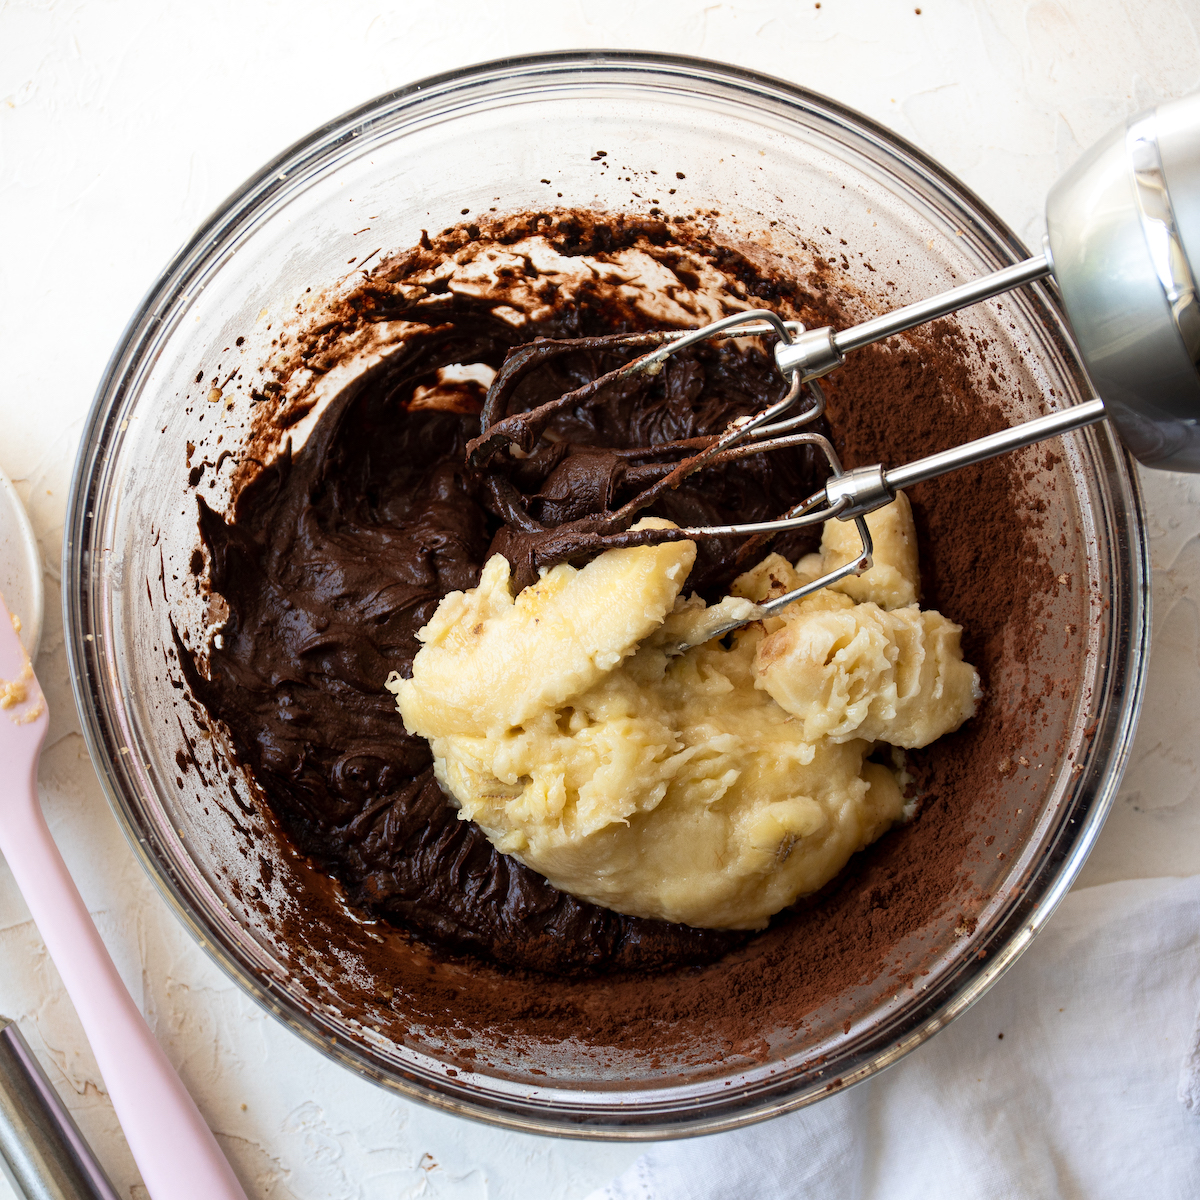 A bowl of chocolate cake batter with mashed bananas on top.